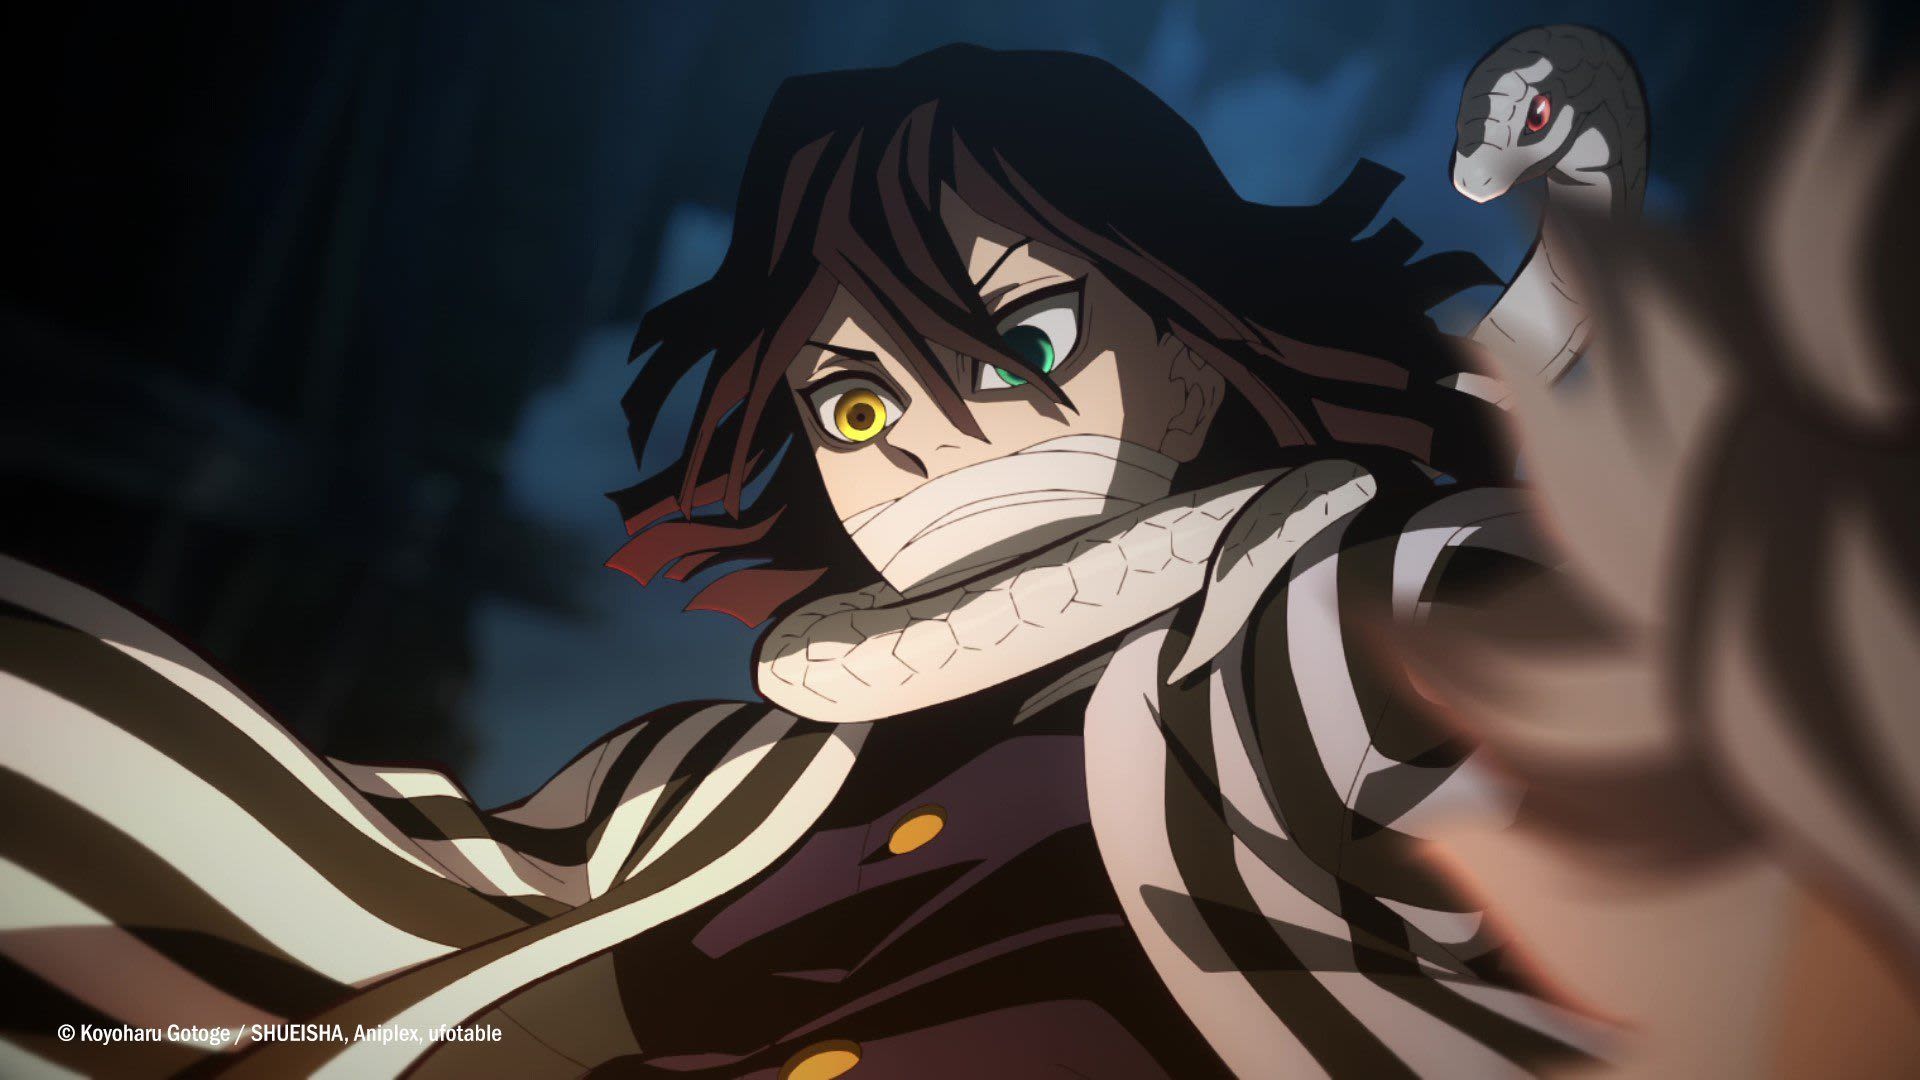 Demon Slayer season 4, episode 1 review: "Comes perilously close to the dreaded f-word – filler – at times"